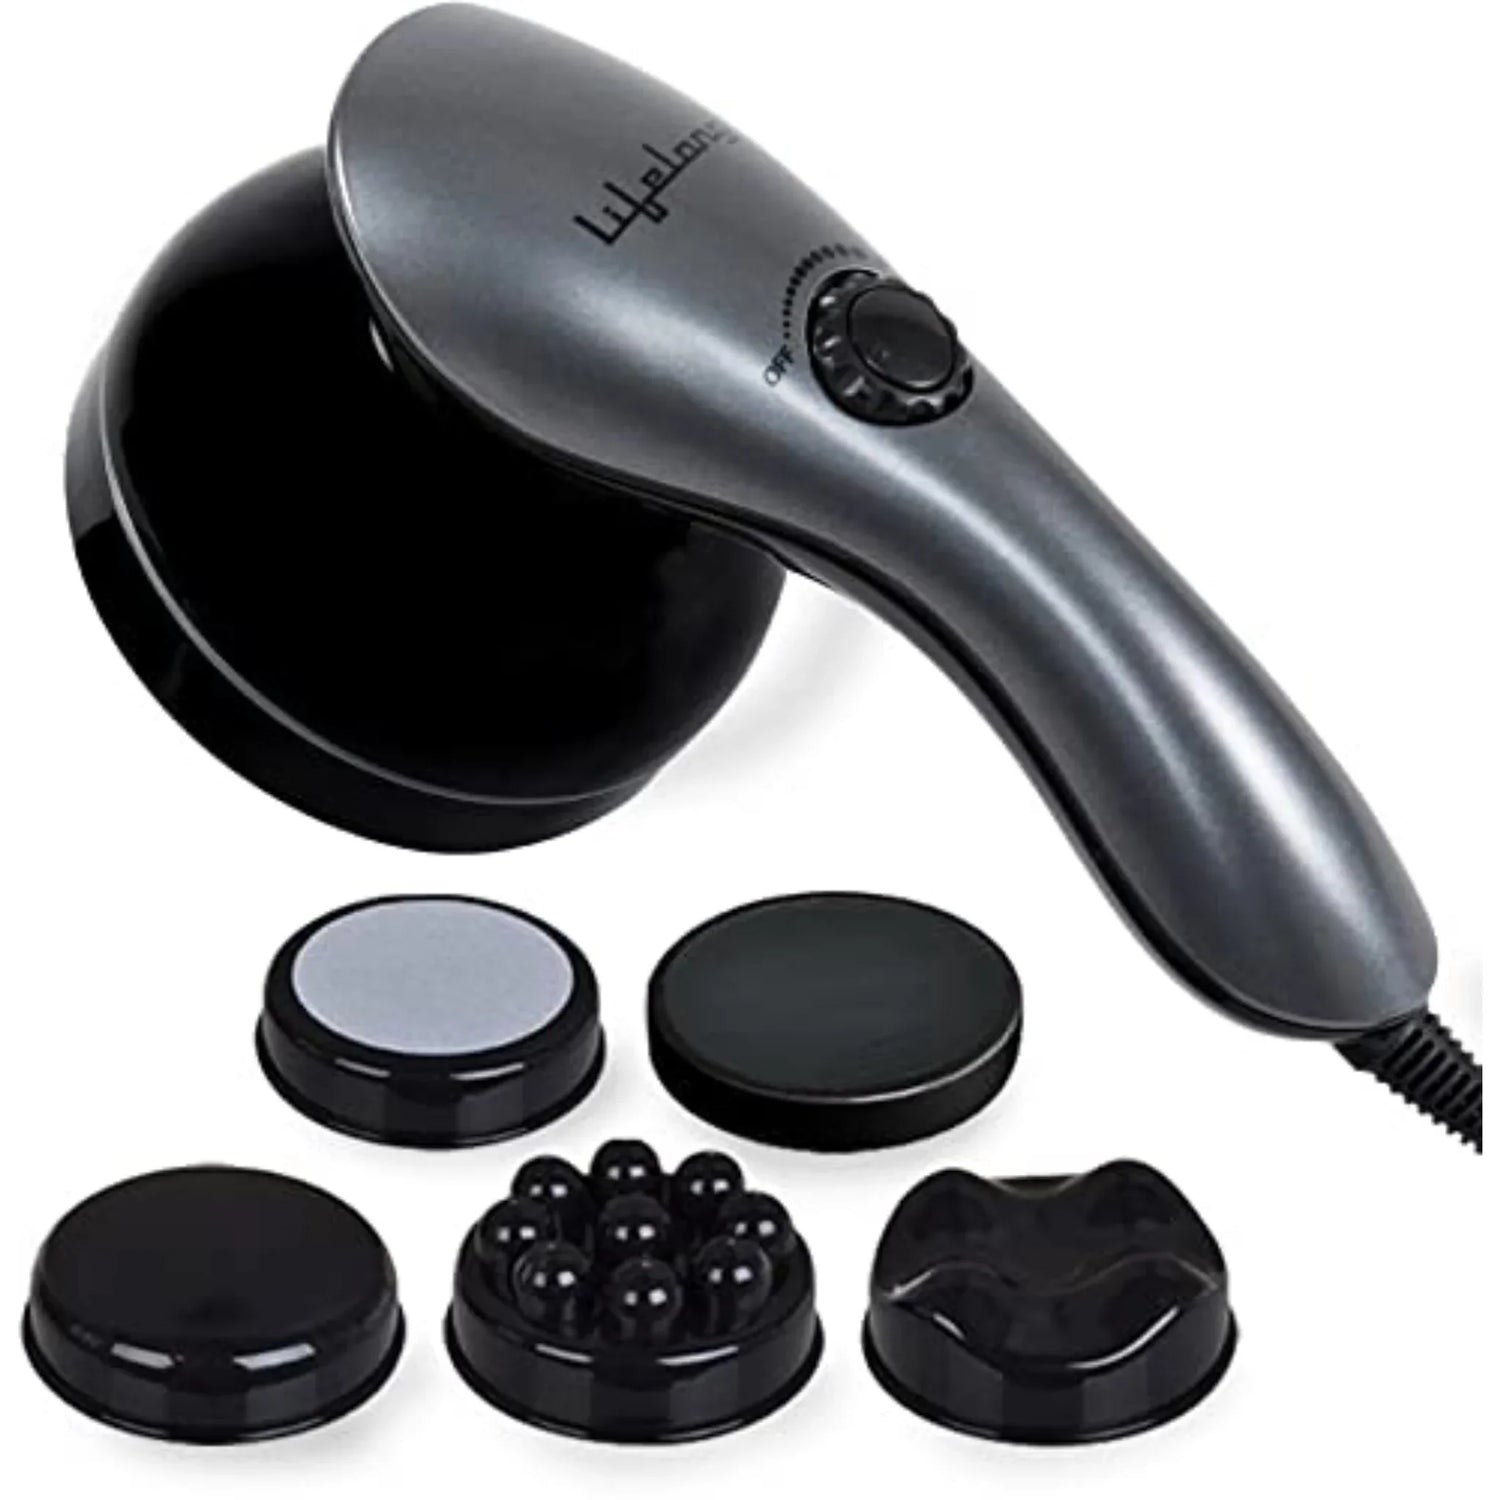 Lifelong Llm171 Electric Handheld Pain Relief Full Body Massager